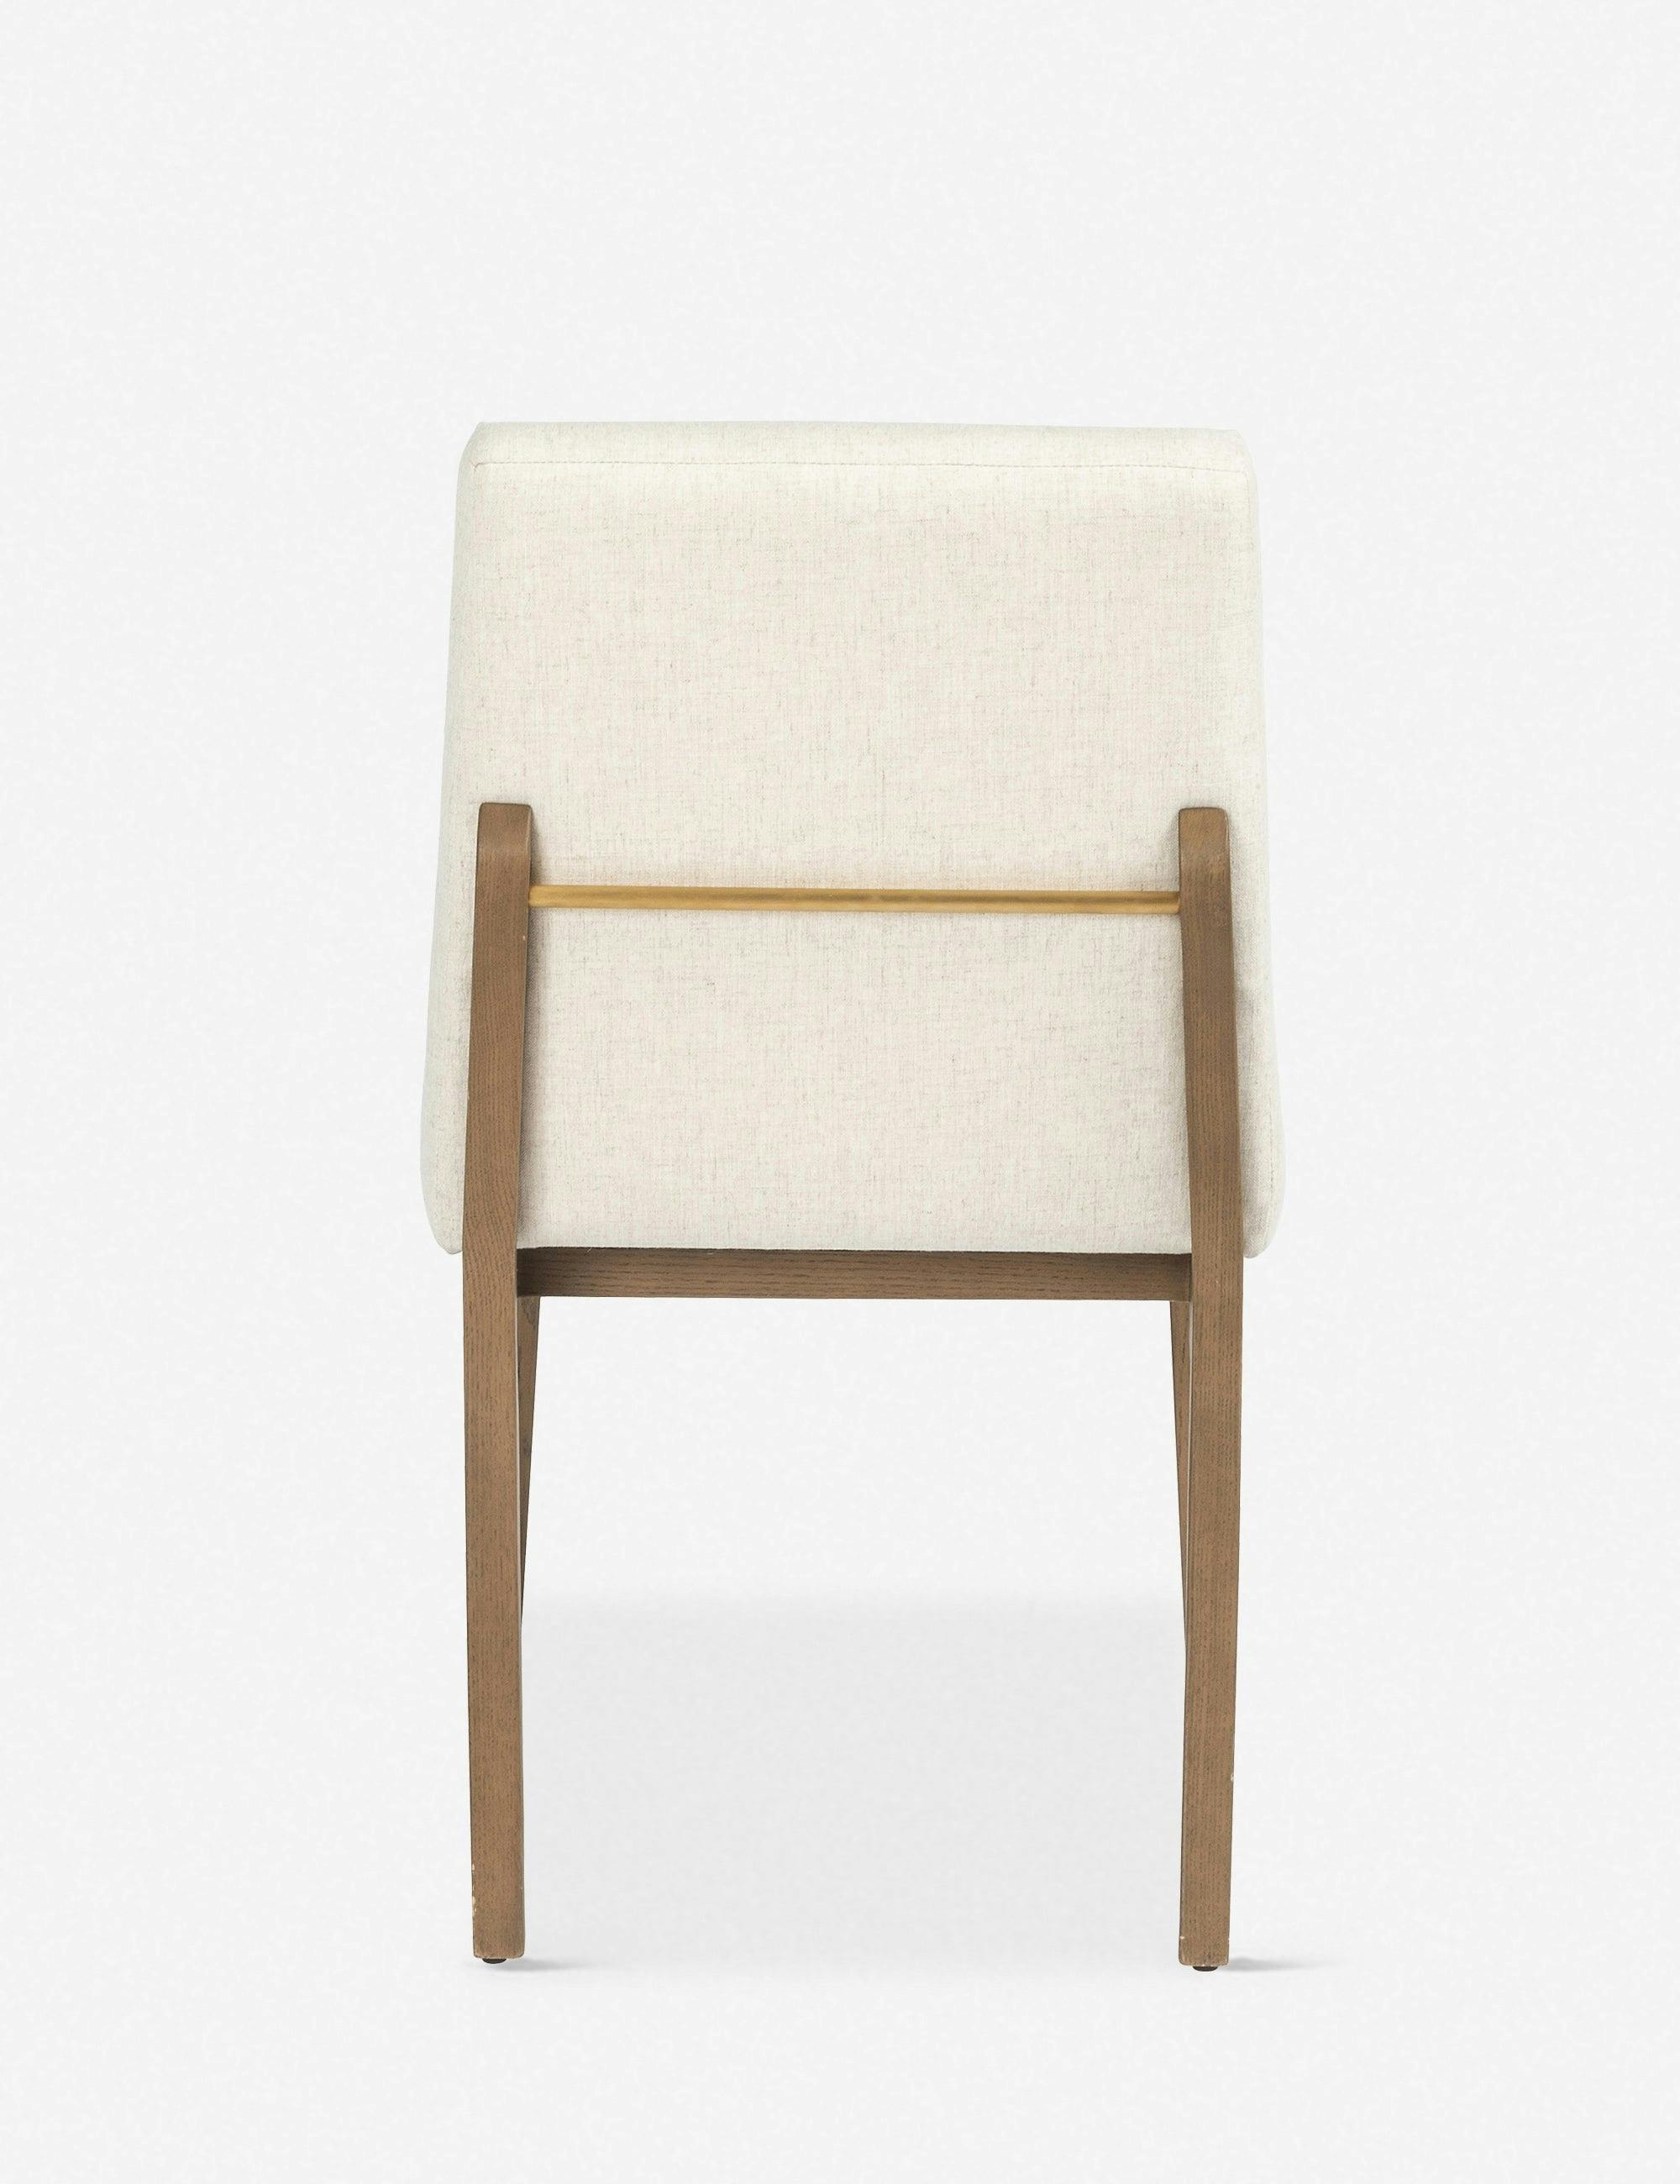 Ivey Dining Chair